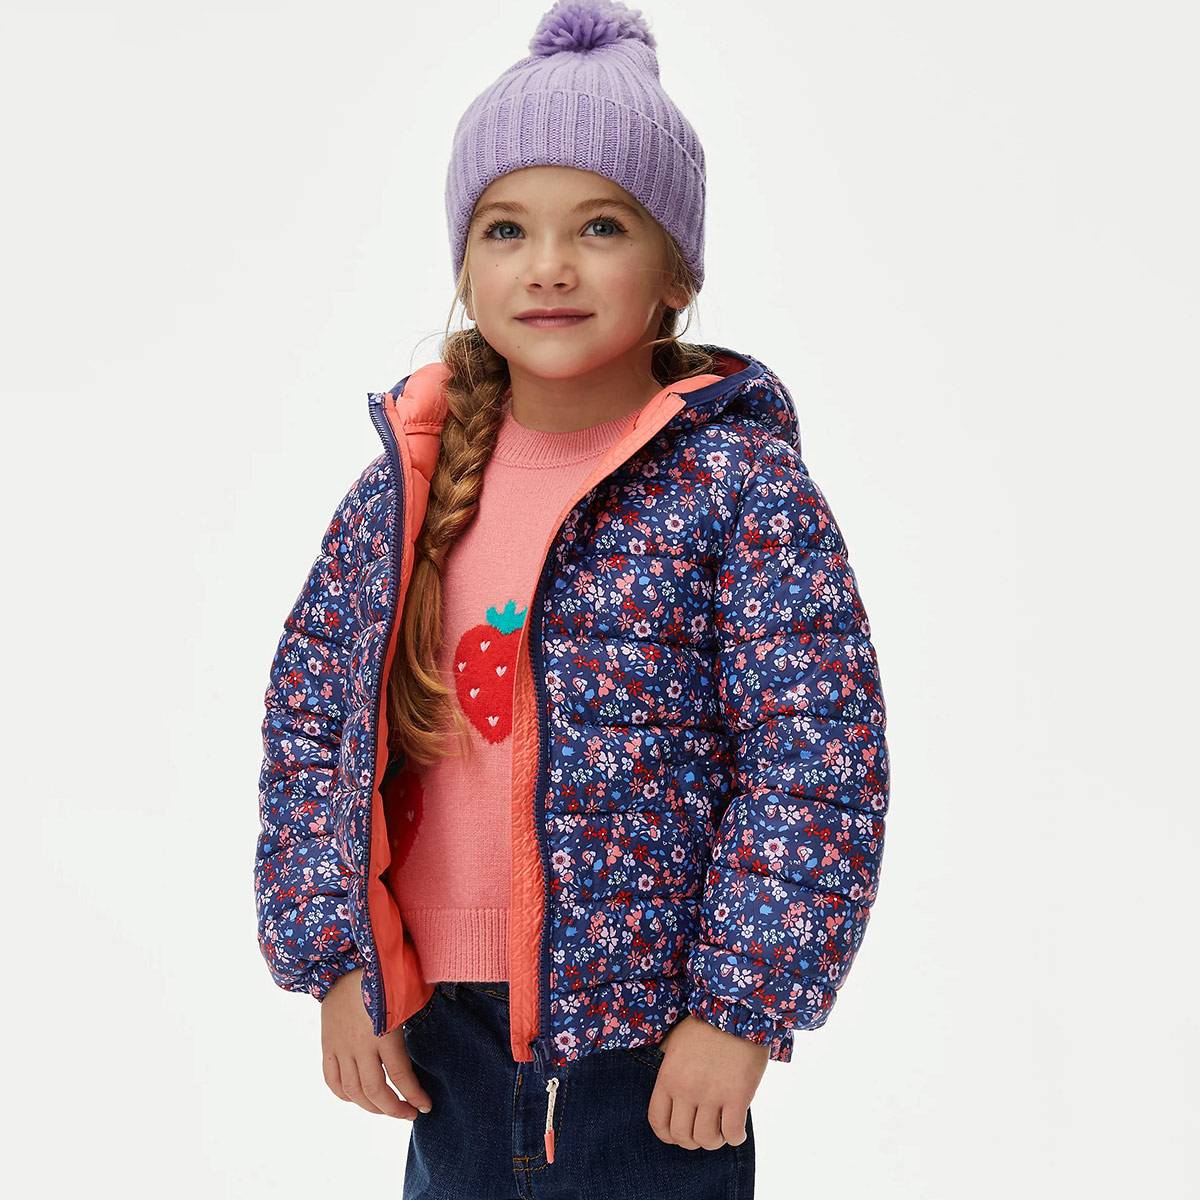 Girl wearing floral navy coat and lilac hat